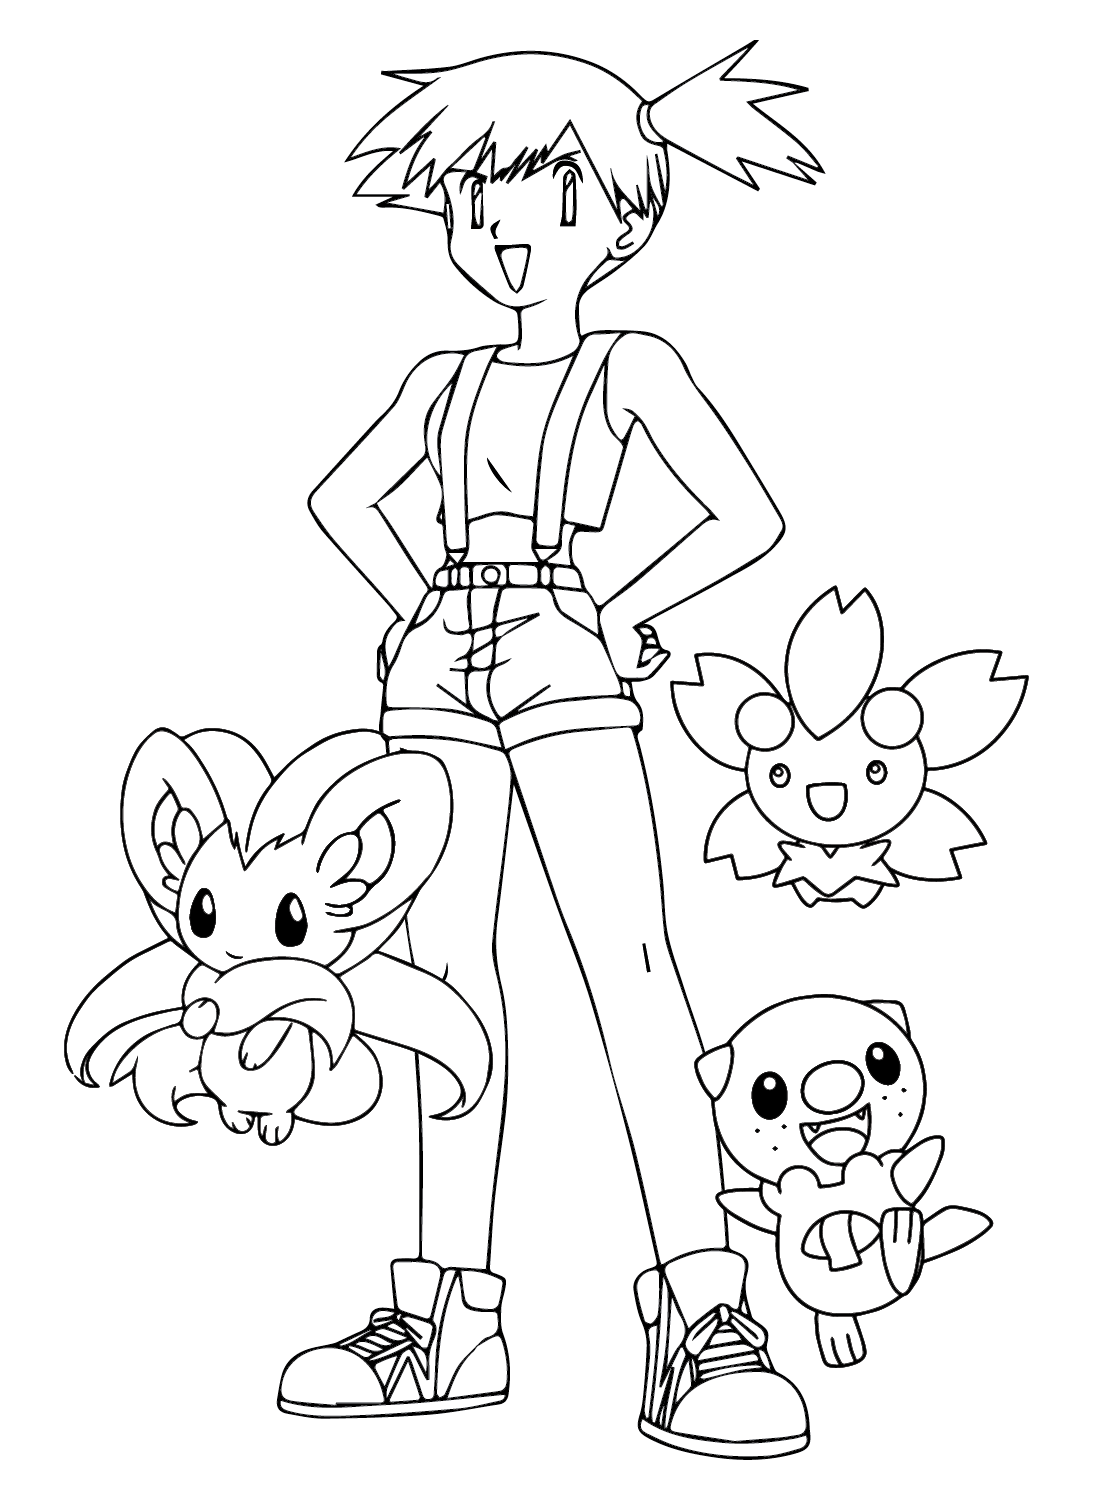 Pokemon Coloring Pages Misty from Misty